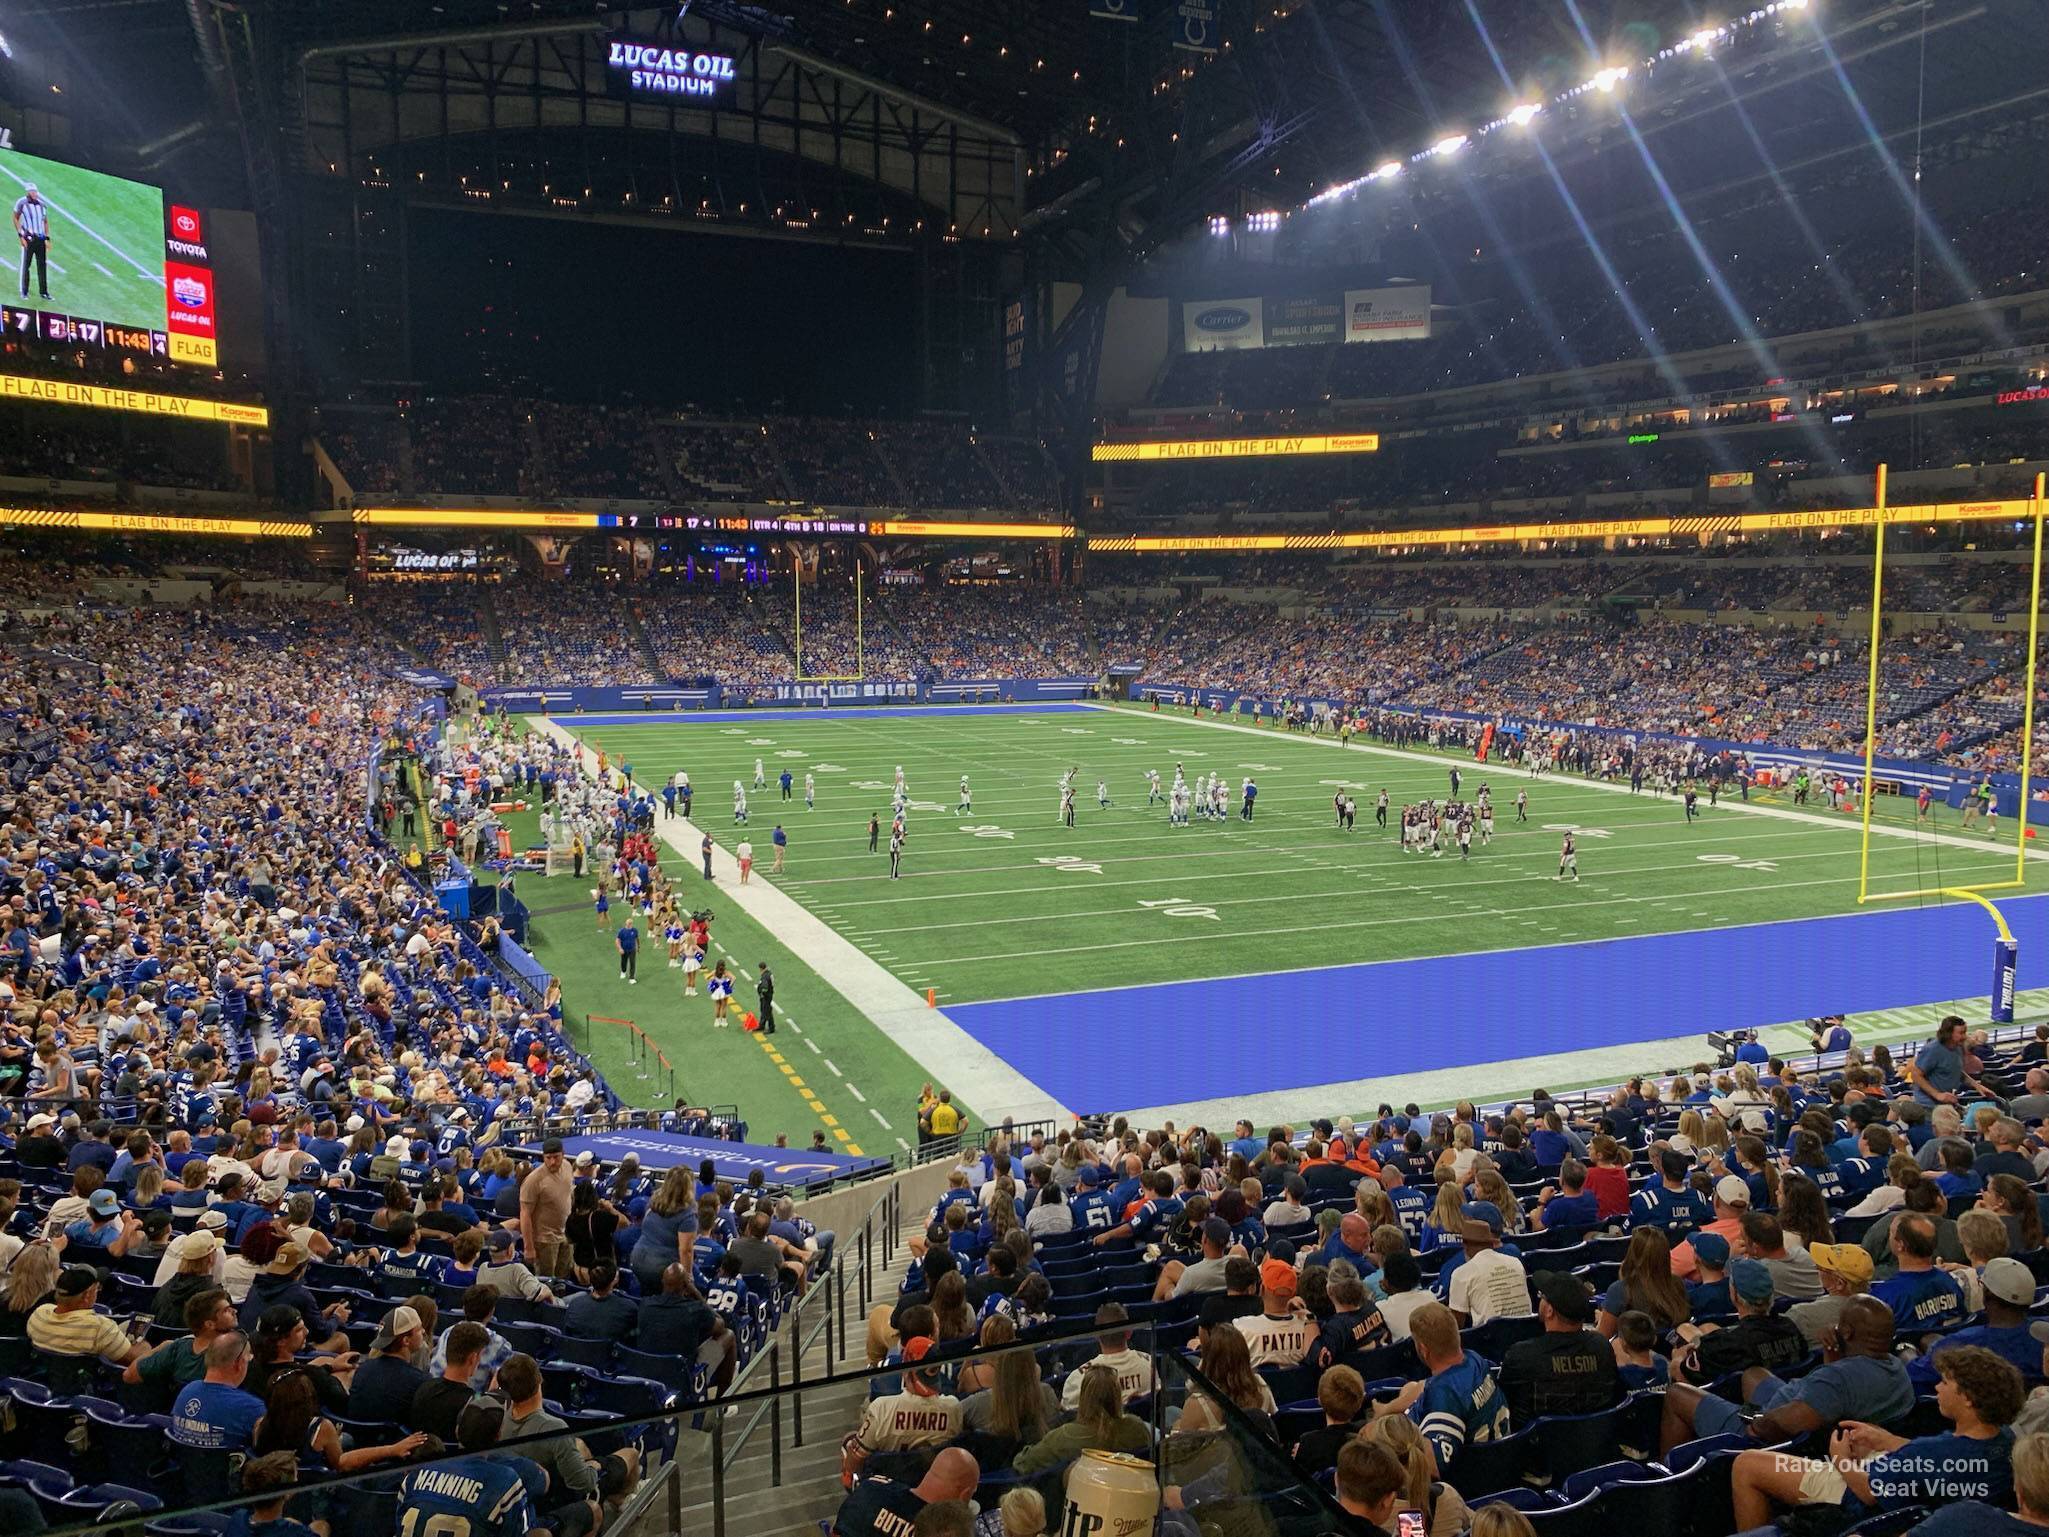 section 231, row 1 seat view  for football - lucas oil stadium